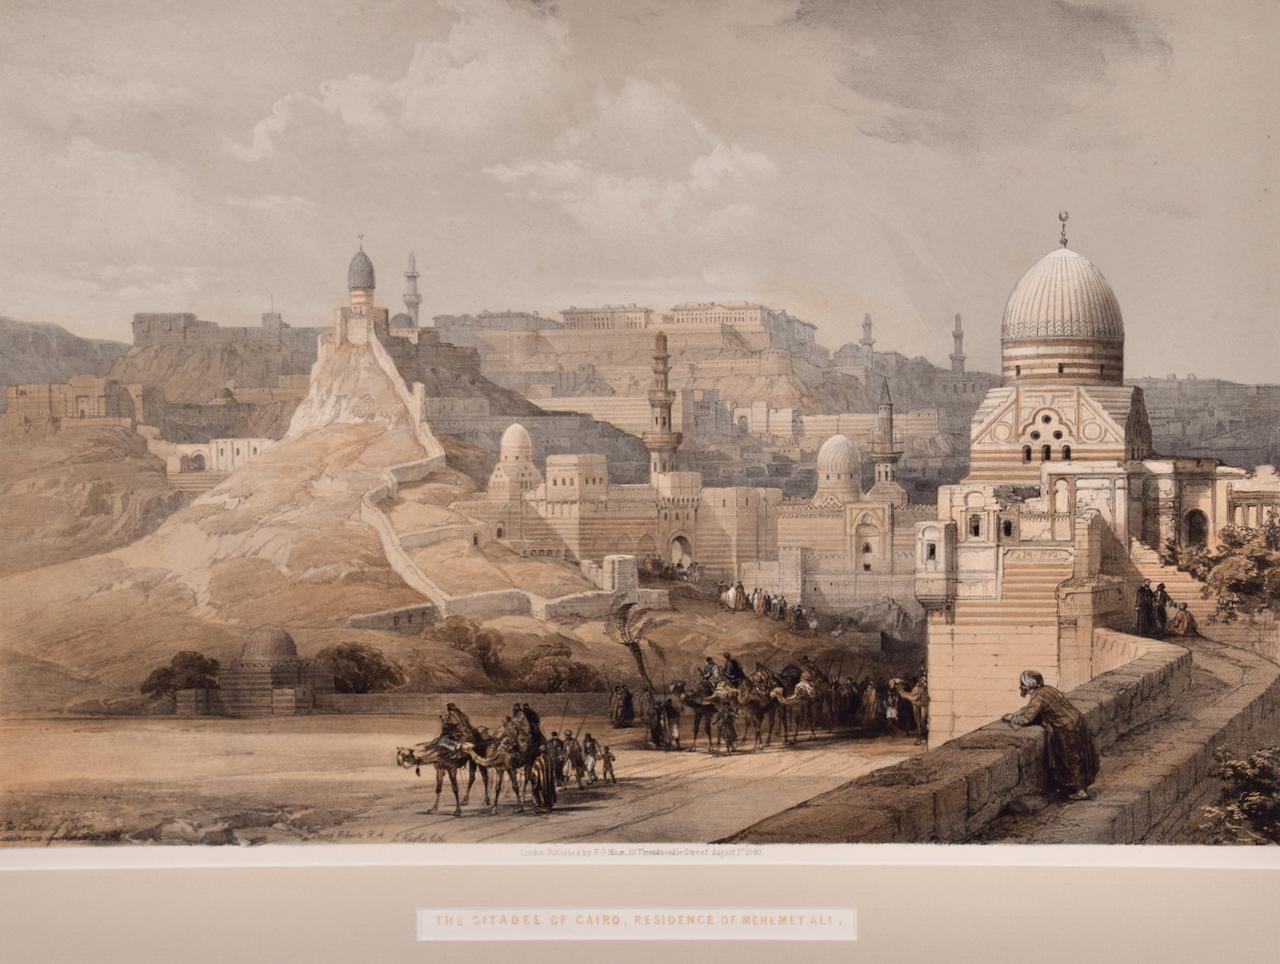 The Citadel of Cairo: 19th C. Hand-colored Roberts Lithograph - Print by David Roberts